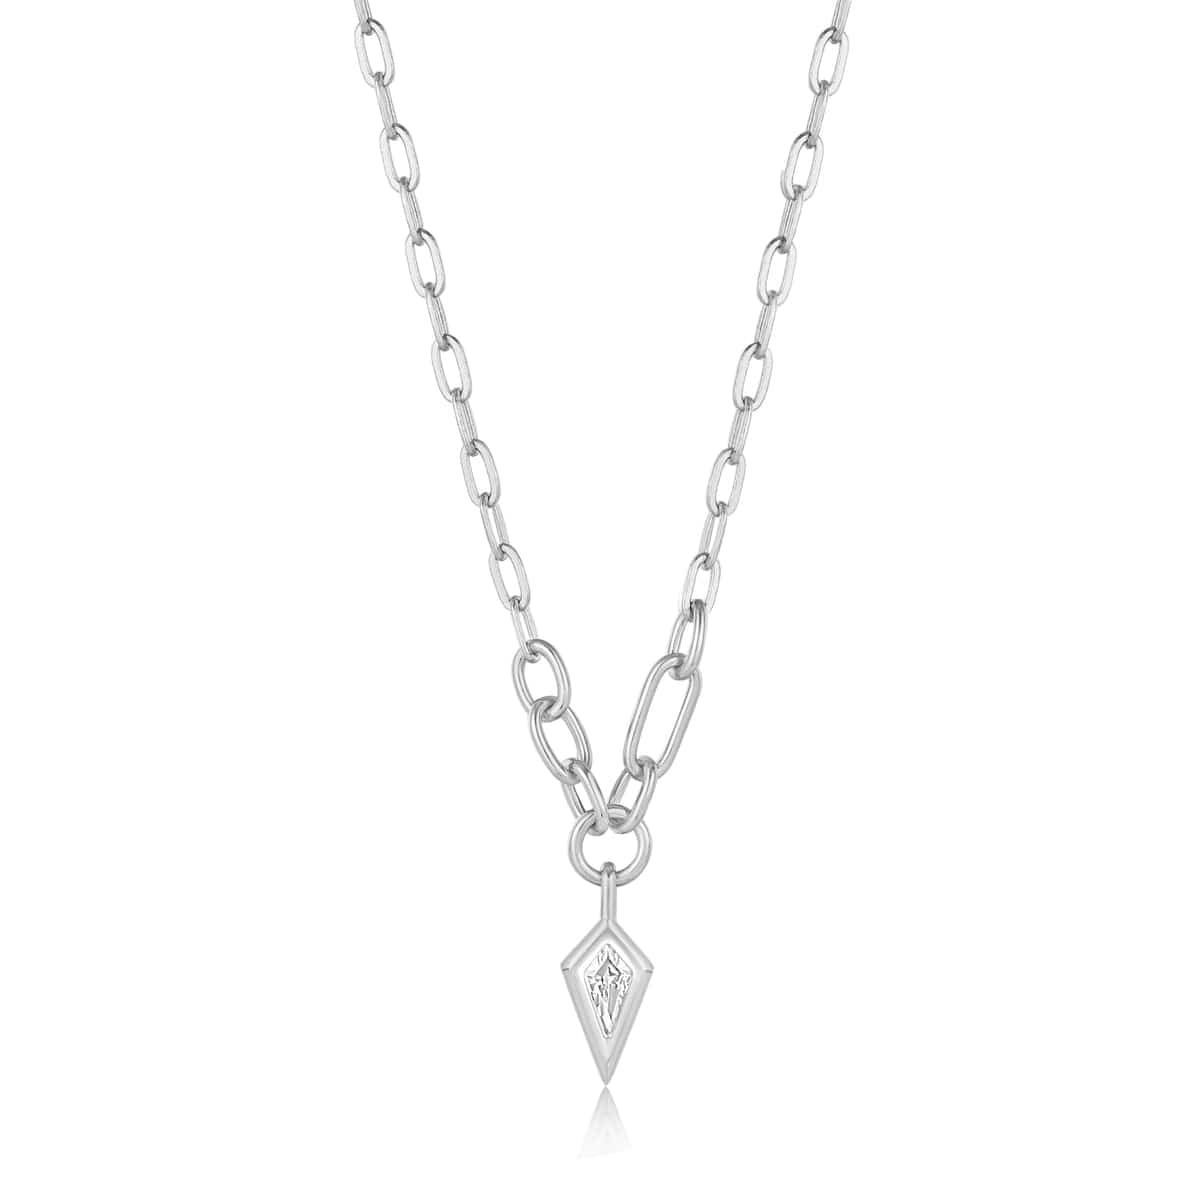 NKL Silver Sparkle Drop Pendant Chunky Chain Necklace